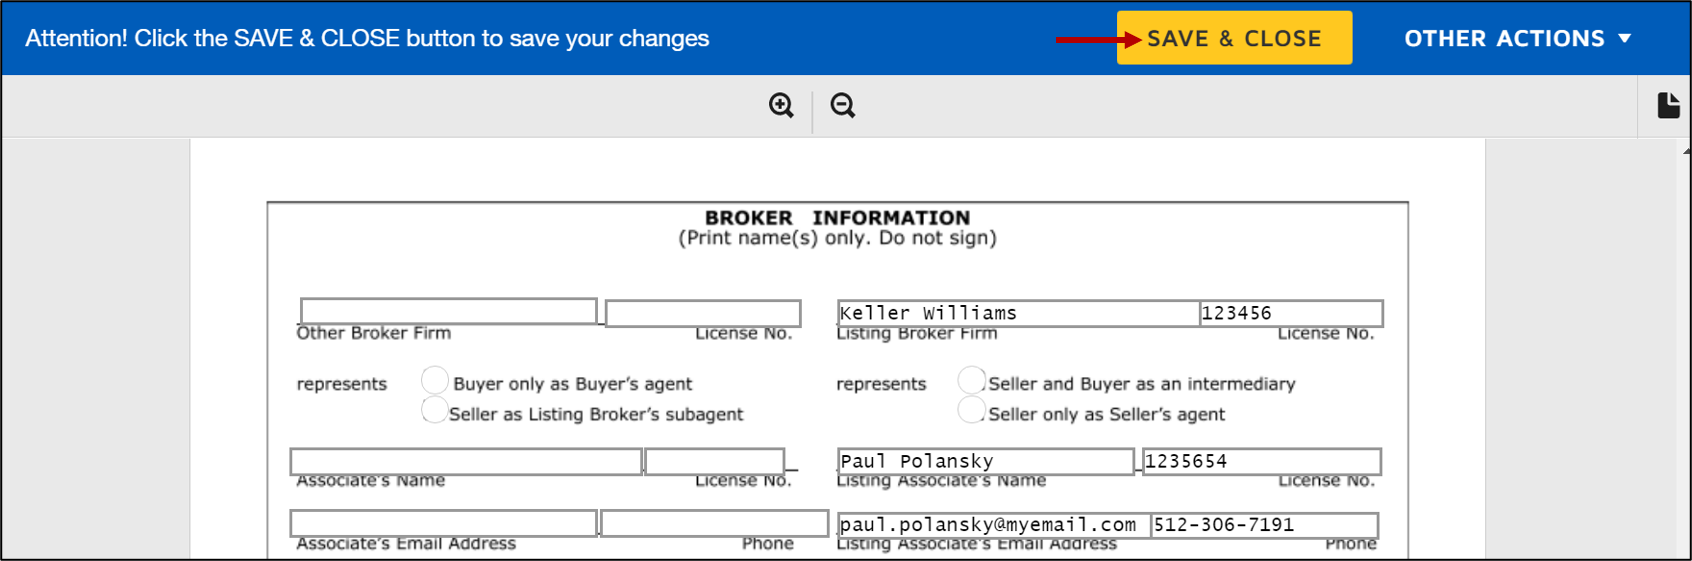 docusign_save_and_close_form_template.png